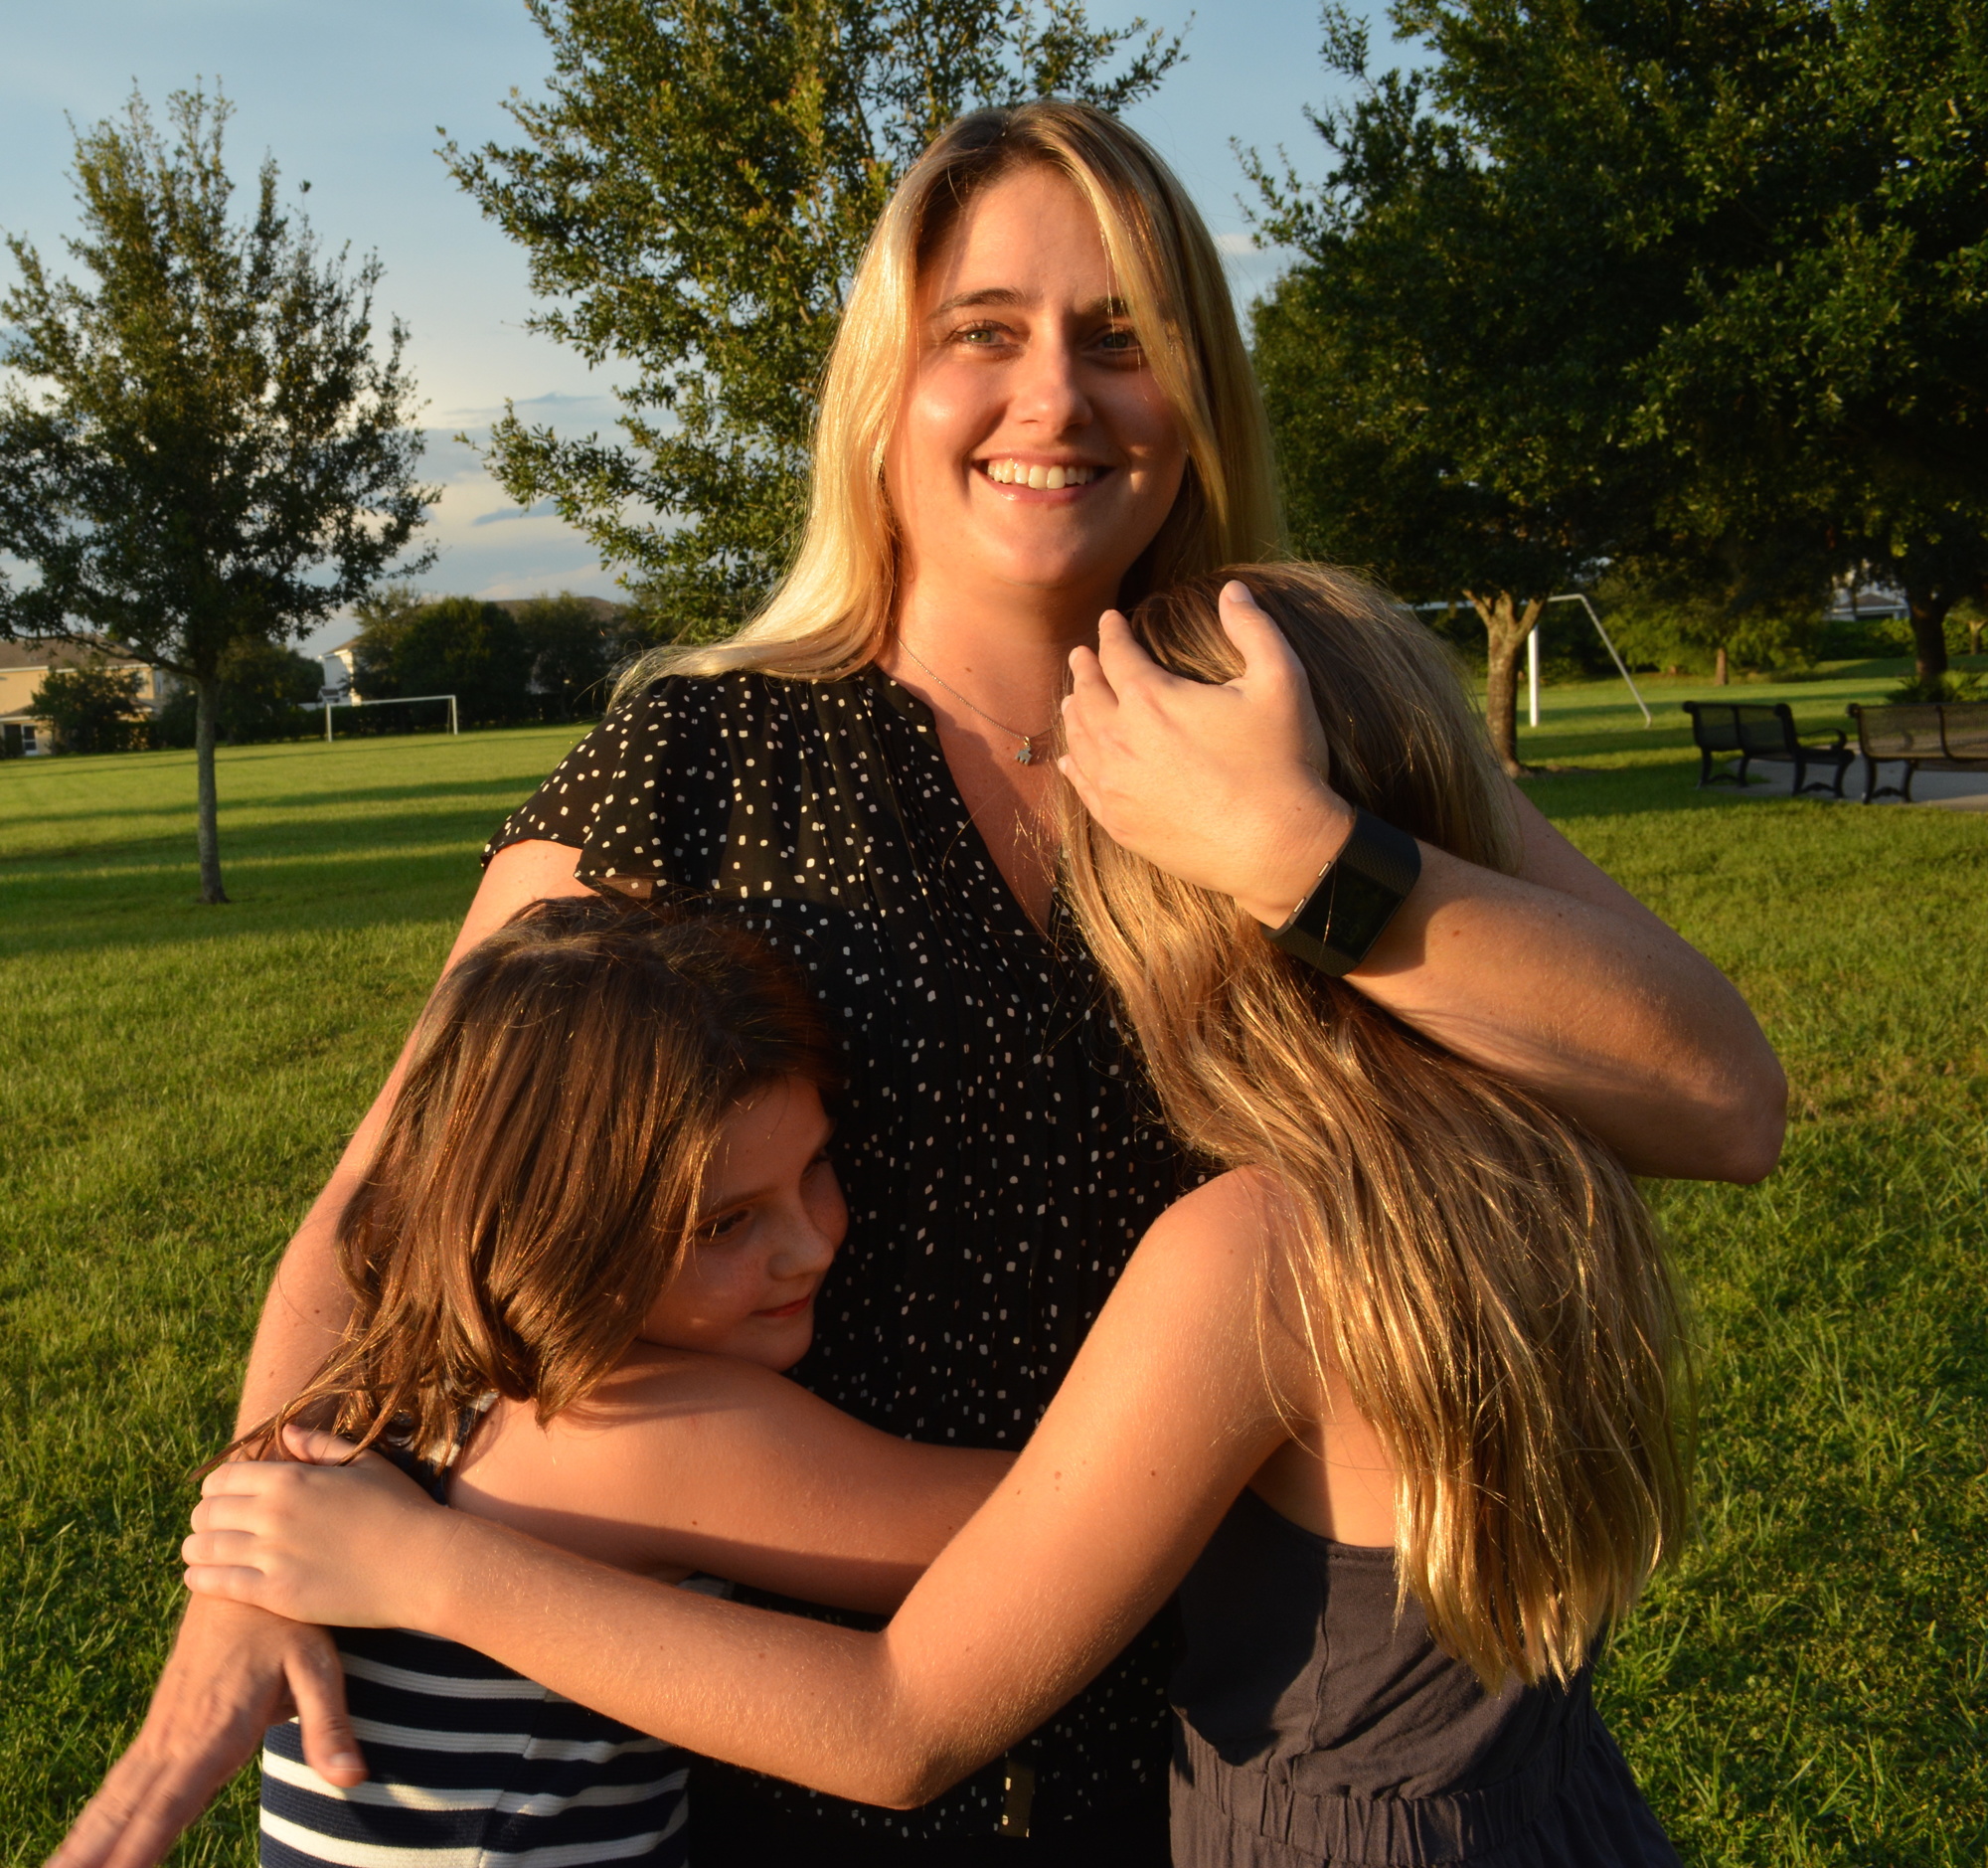 The girls, Hailey and Audrey, say they seldom see their mother, Rachel Weeks, hindered by her disabilities.